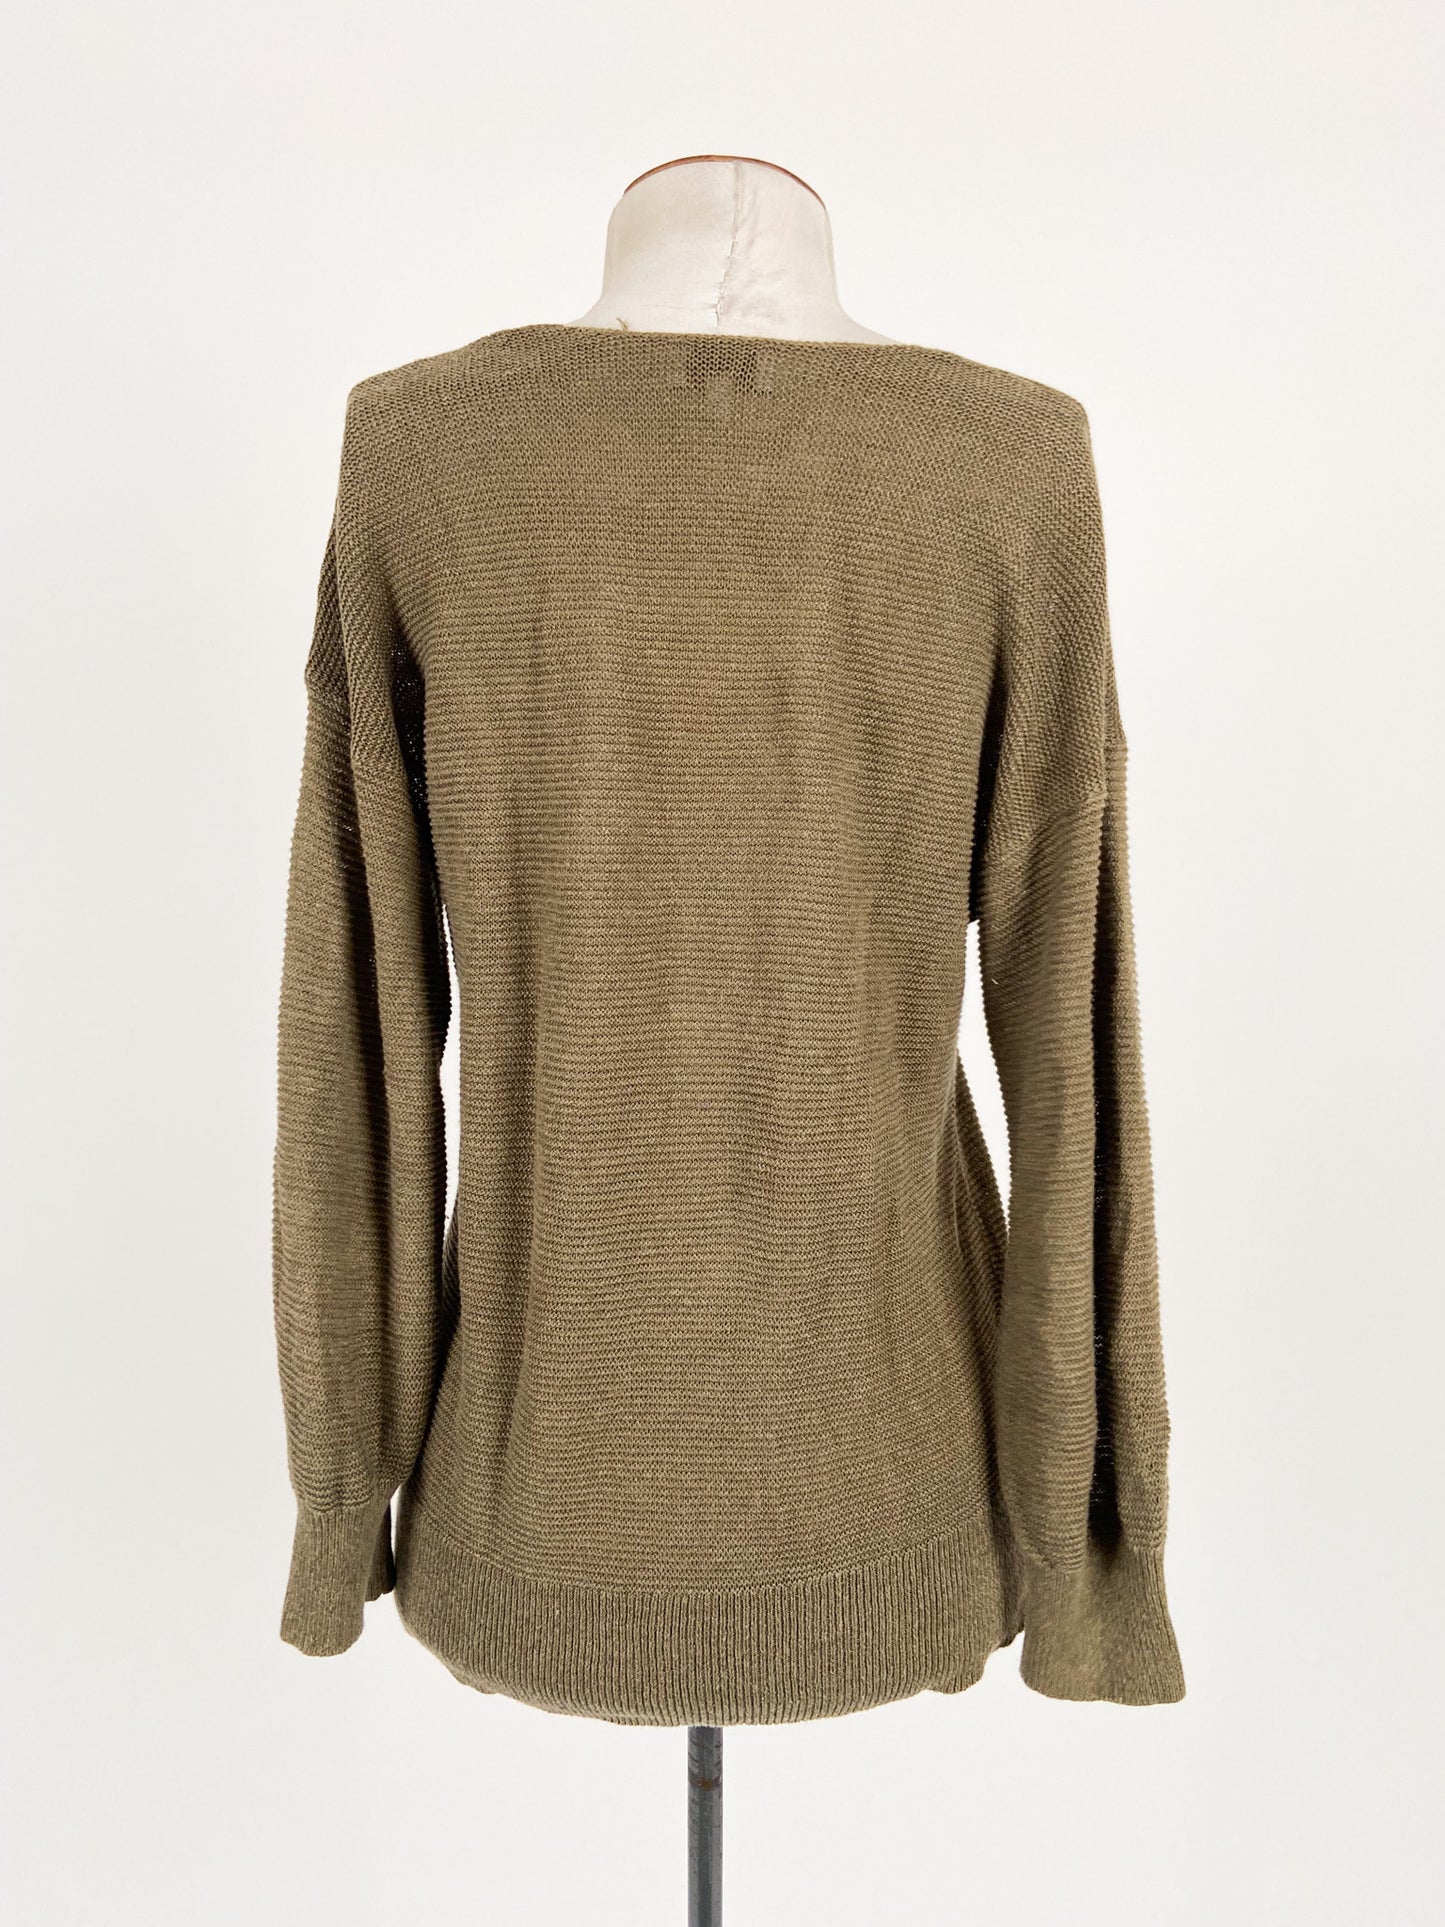 Witchery | Green Casual/Workwear Jumper | Size S